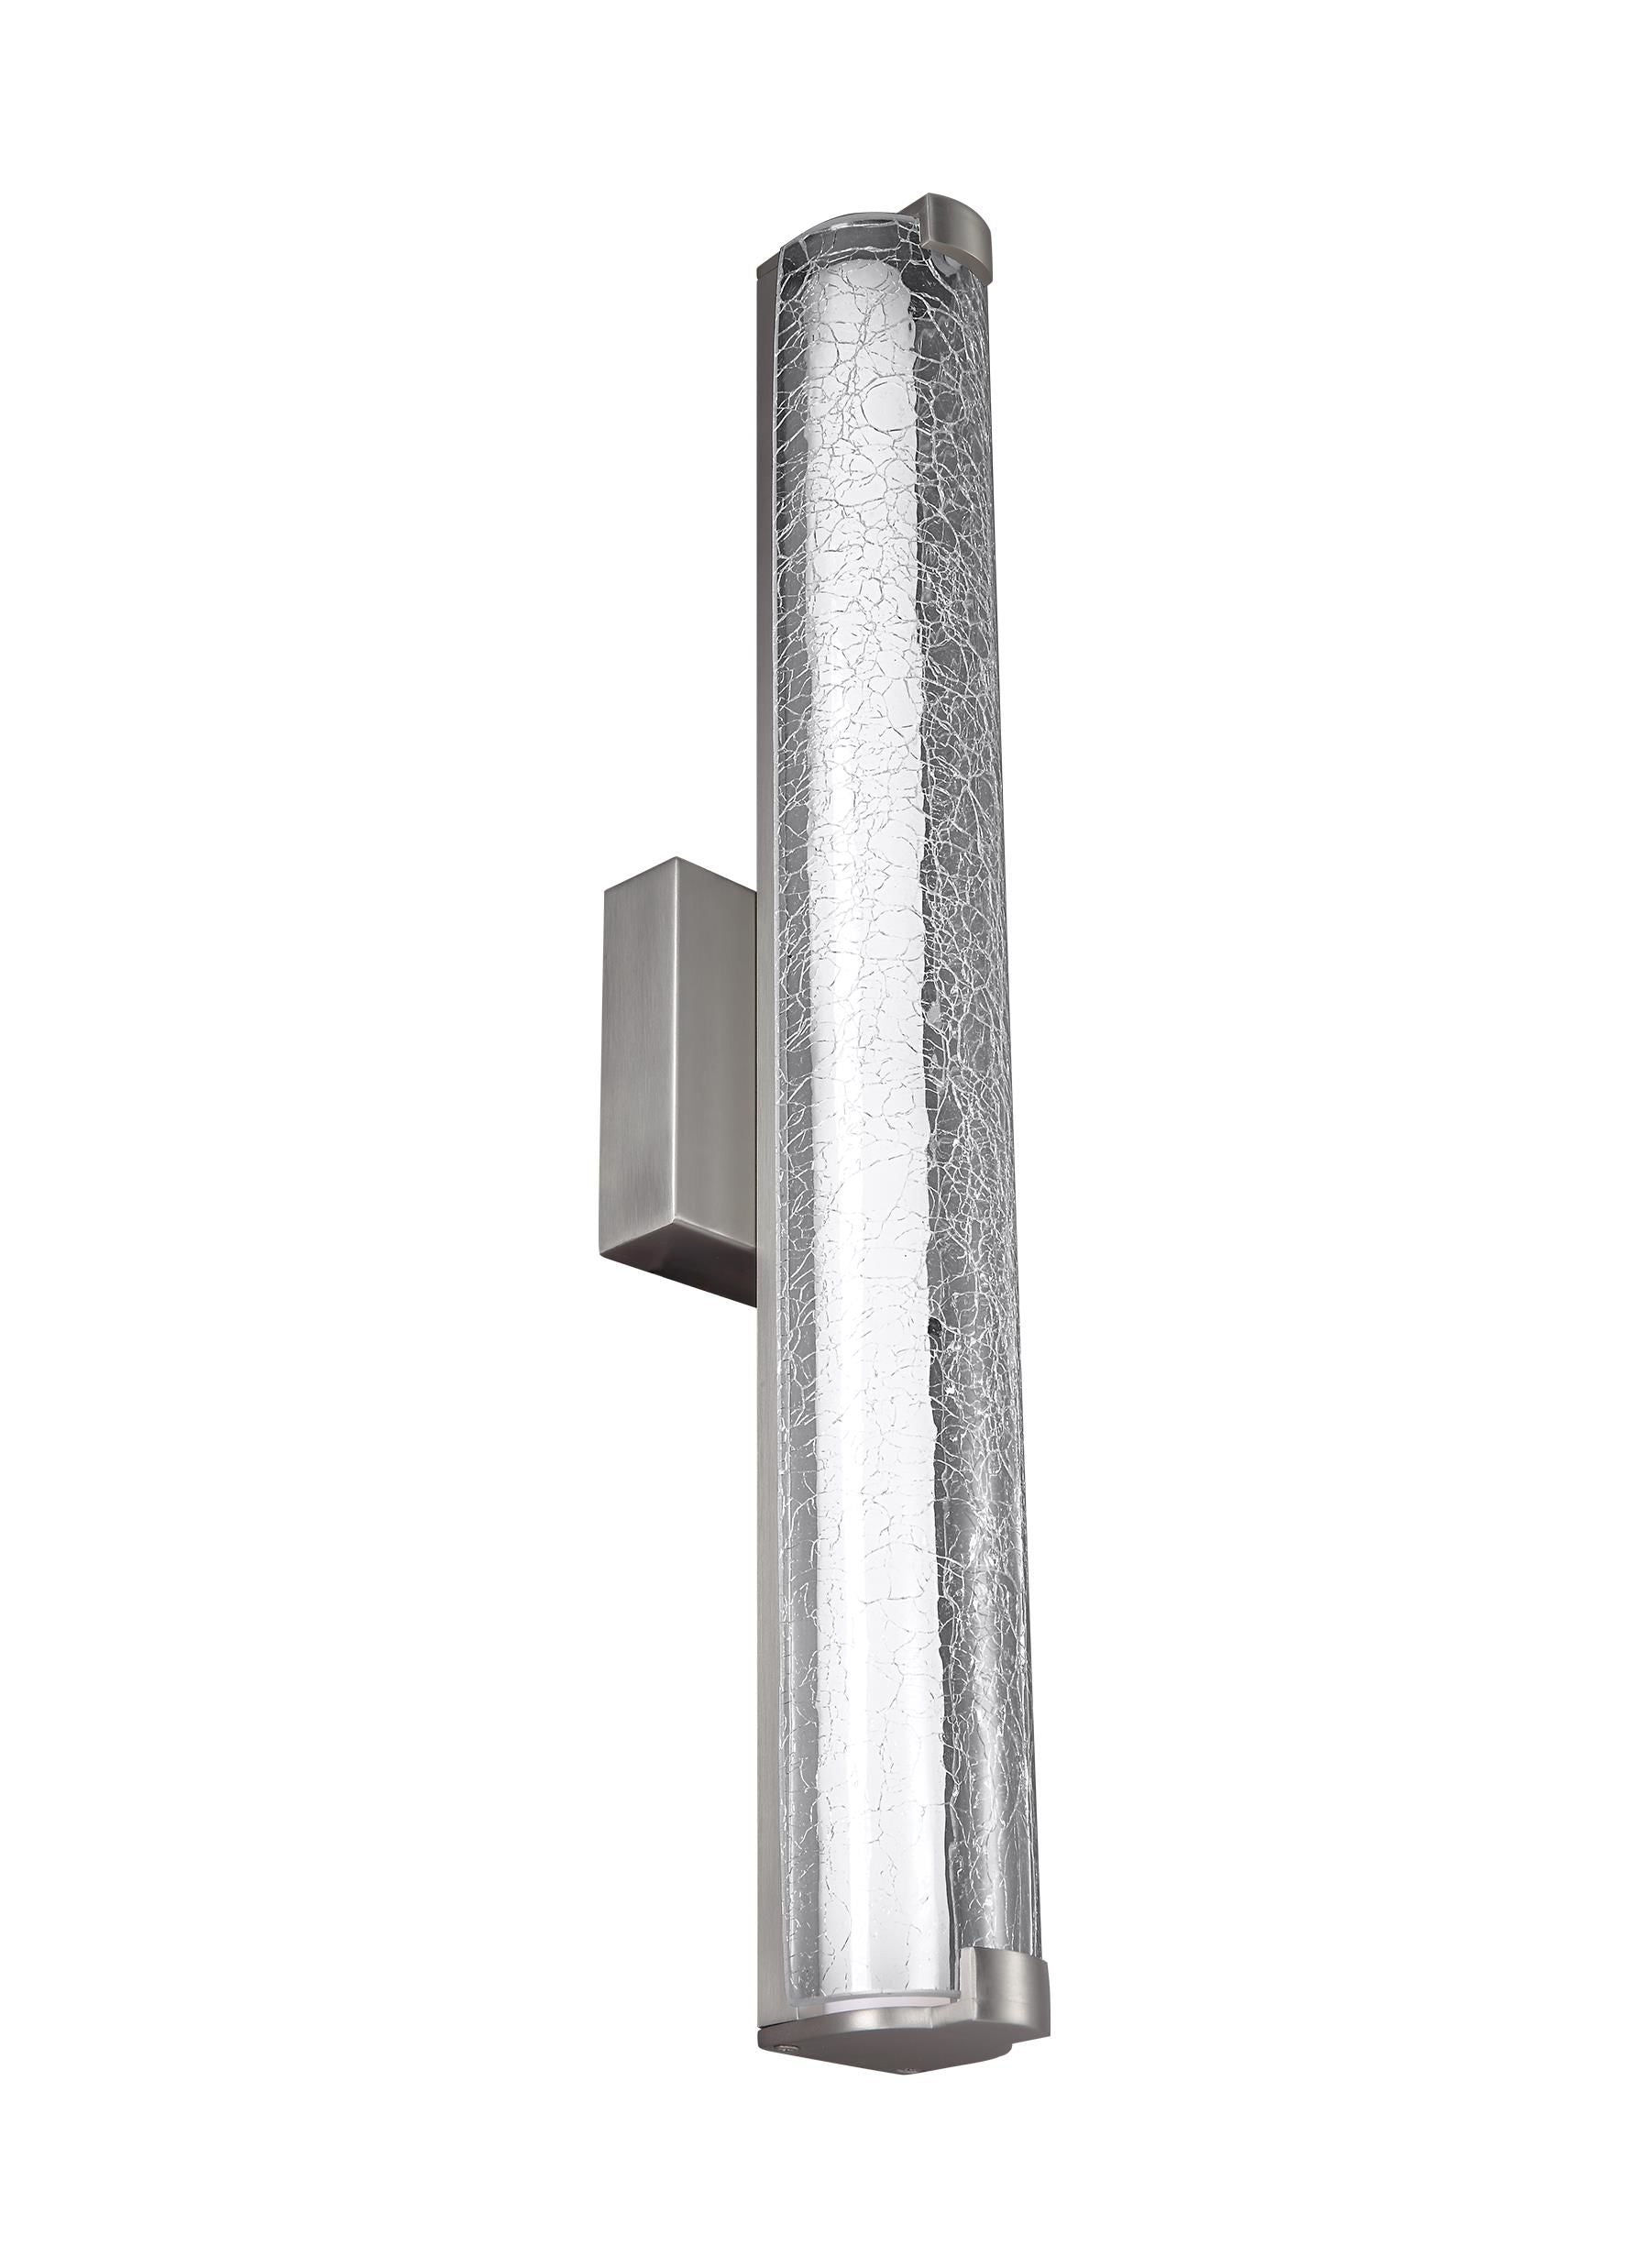 Cutler Bathroom sconce Stainless steel - WB1868SN-L1 | FEISS